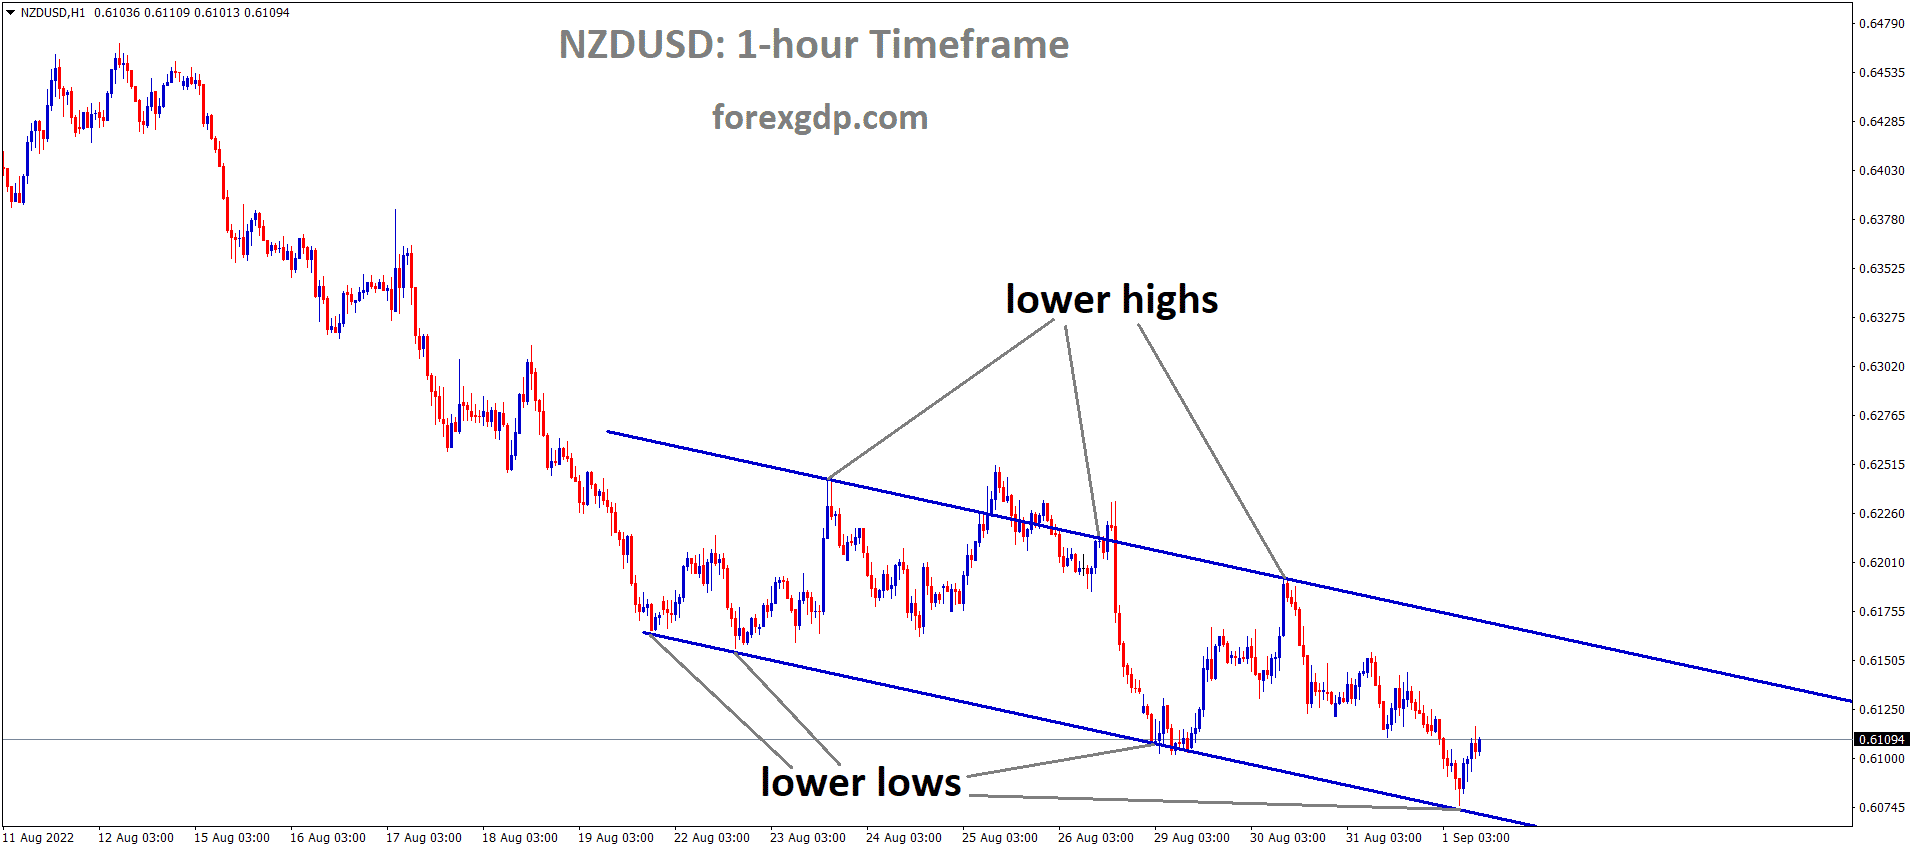 NZDUSD is moving in the Descending channel and the Market has rebounded from the lower low area of the channel.